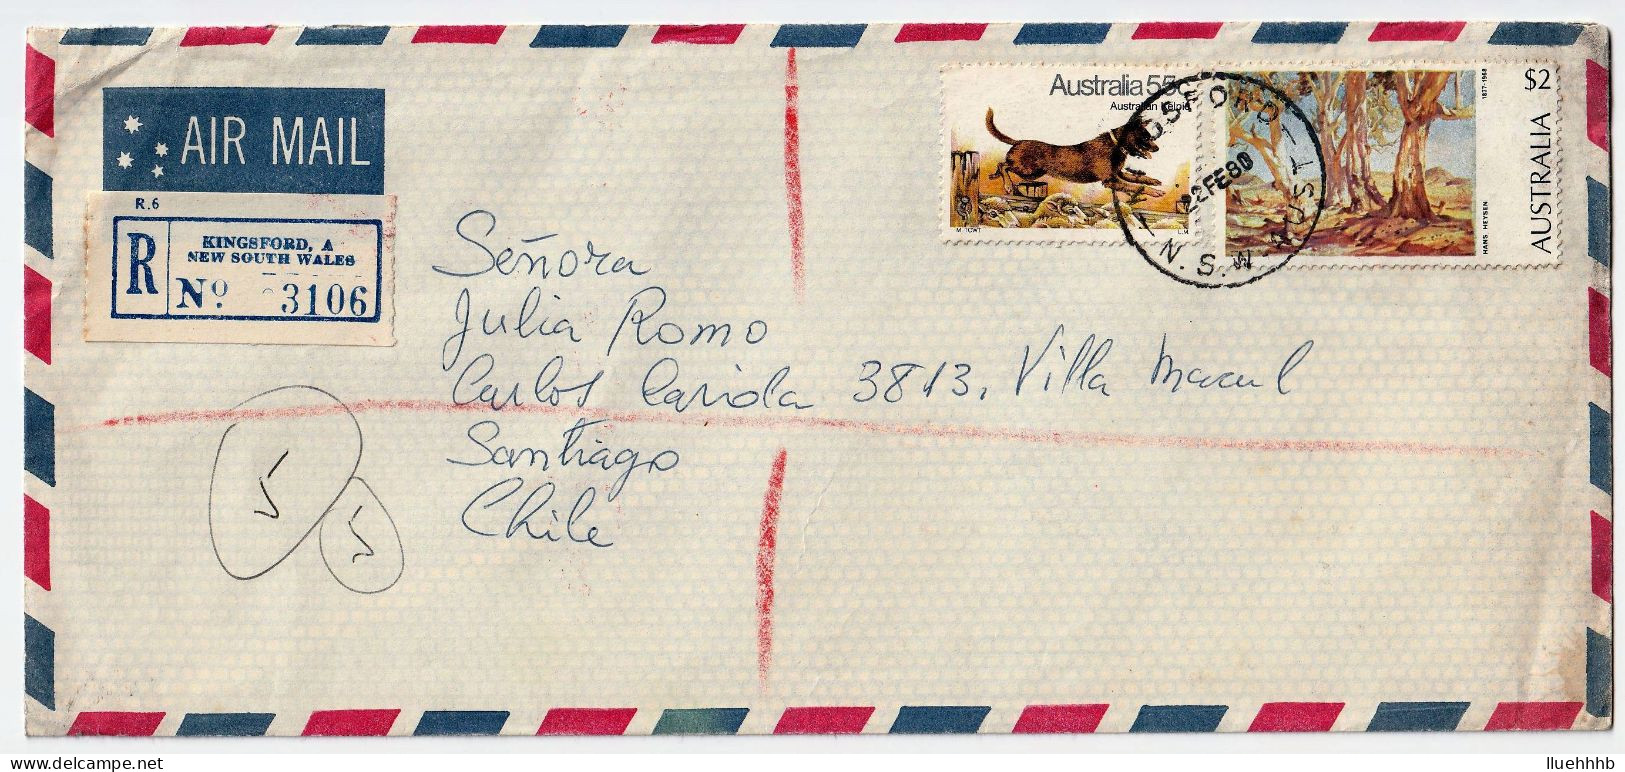 AUSTRALIA: 1980 Registered Airmail Cover To CHILE, $2.55 Rate - Covers & Documents